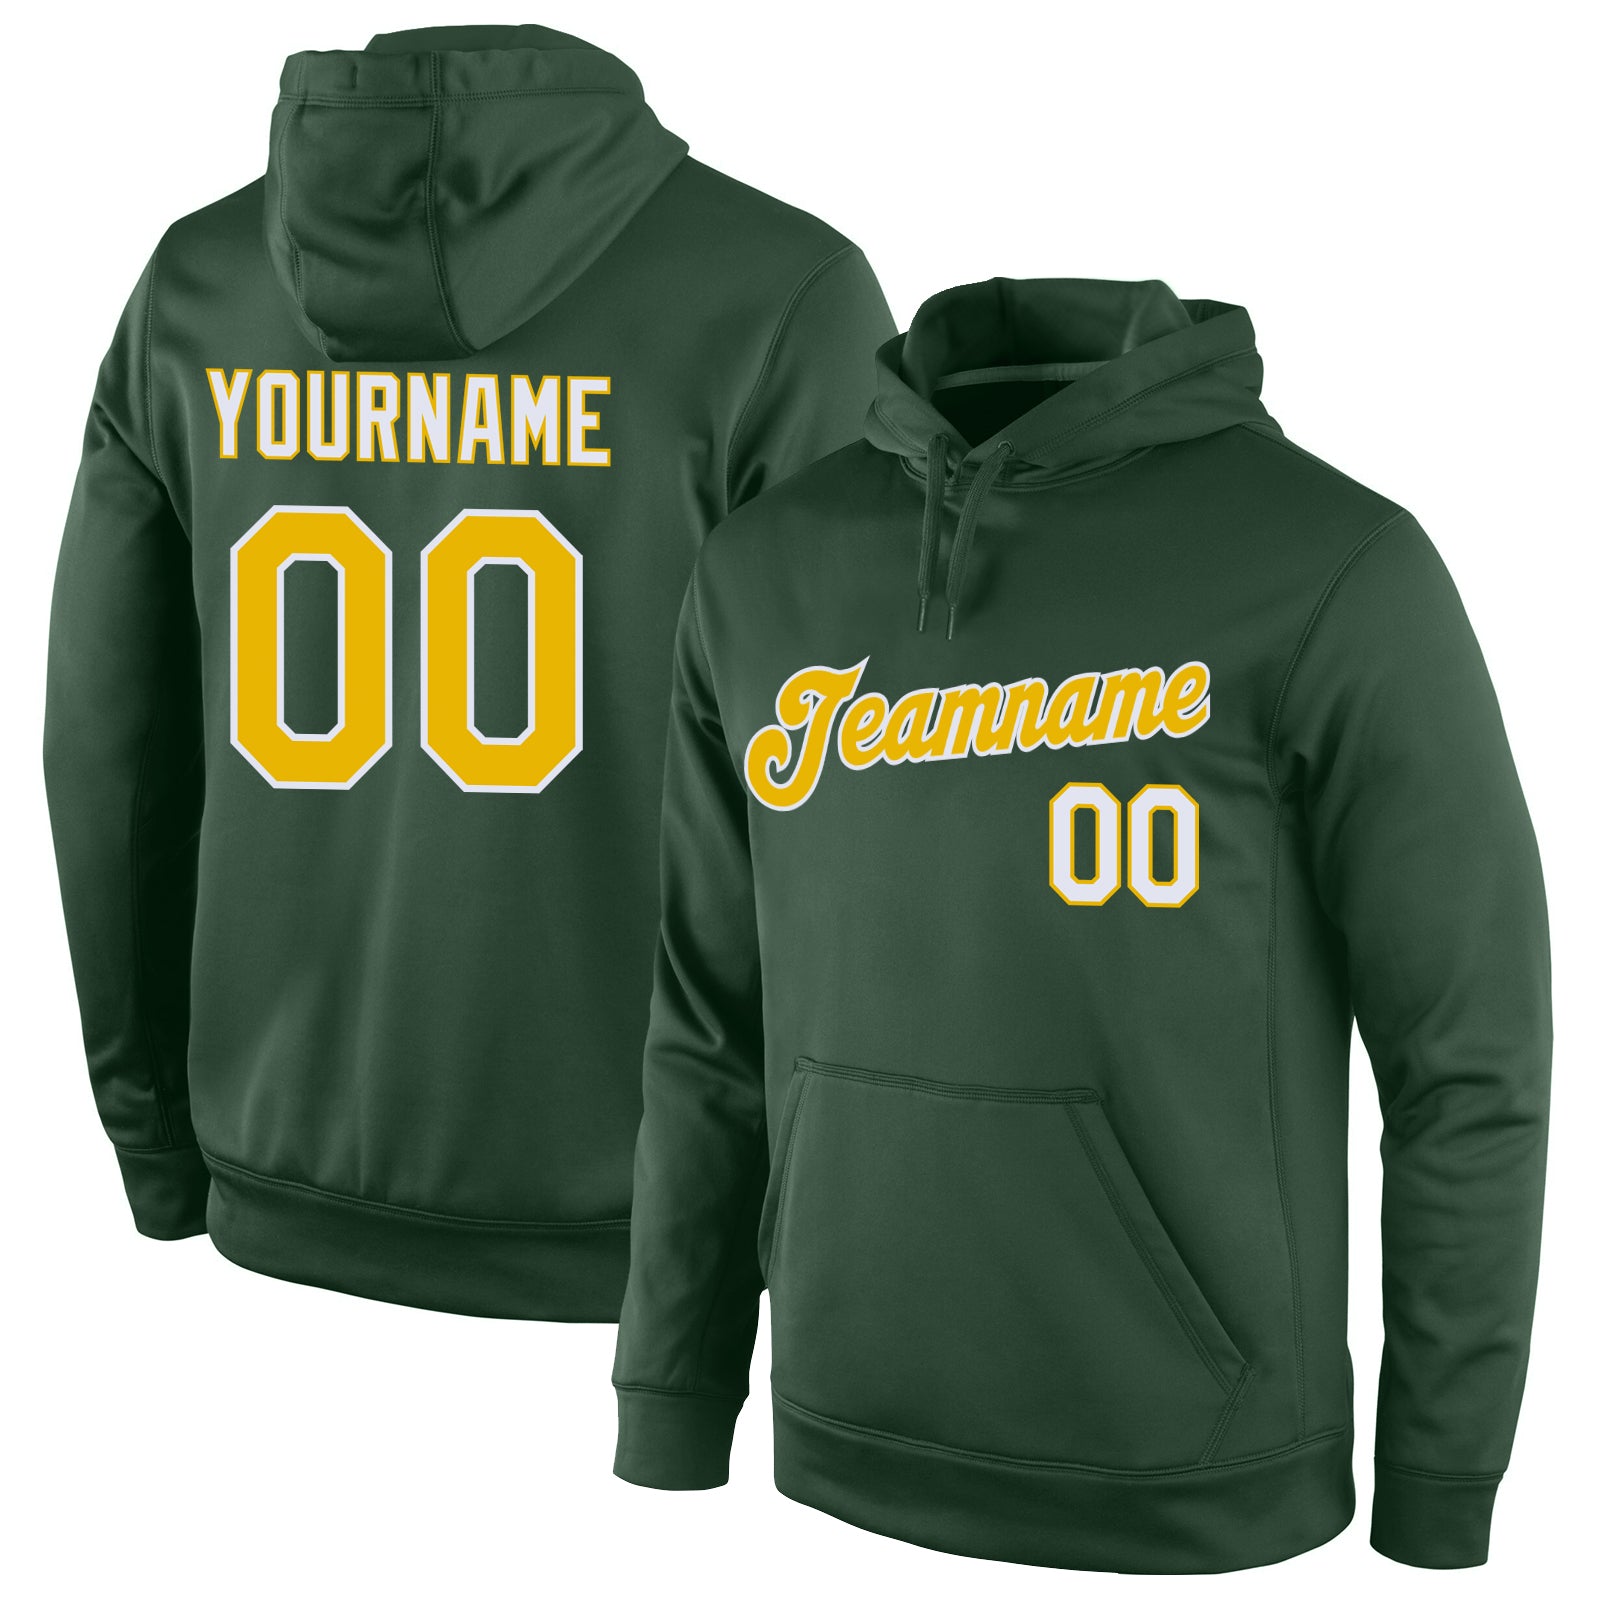 FANSIDEA Custom Stitched Green Gold-White Sports Pullover Sweatshirt Hoodie Youth Size:M